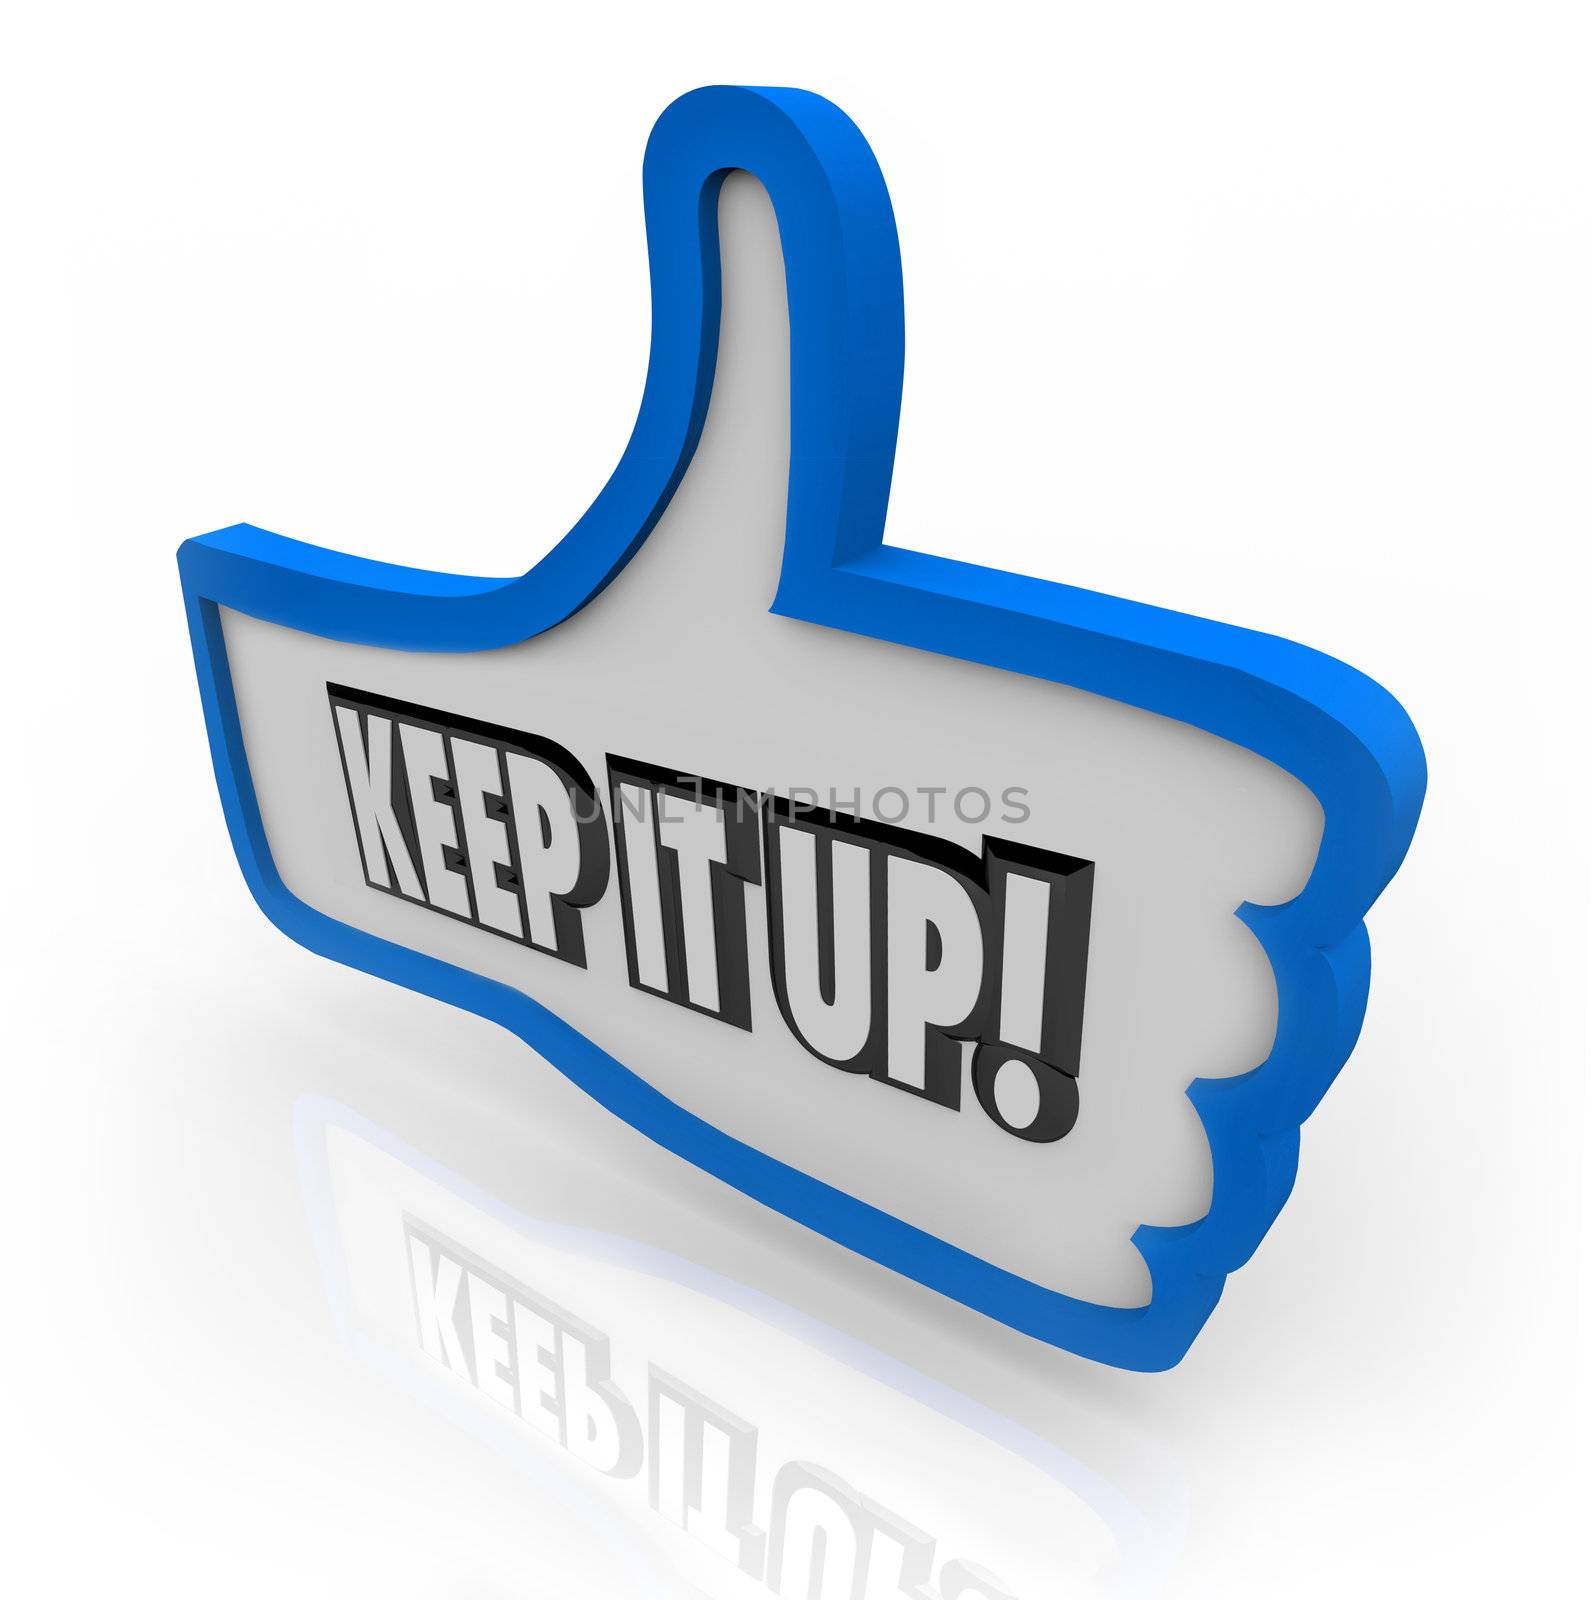 Keep It Up Blue Thumbs Up Word Encouragement Feedback by iQoncept